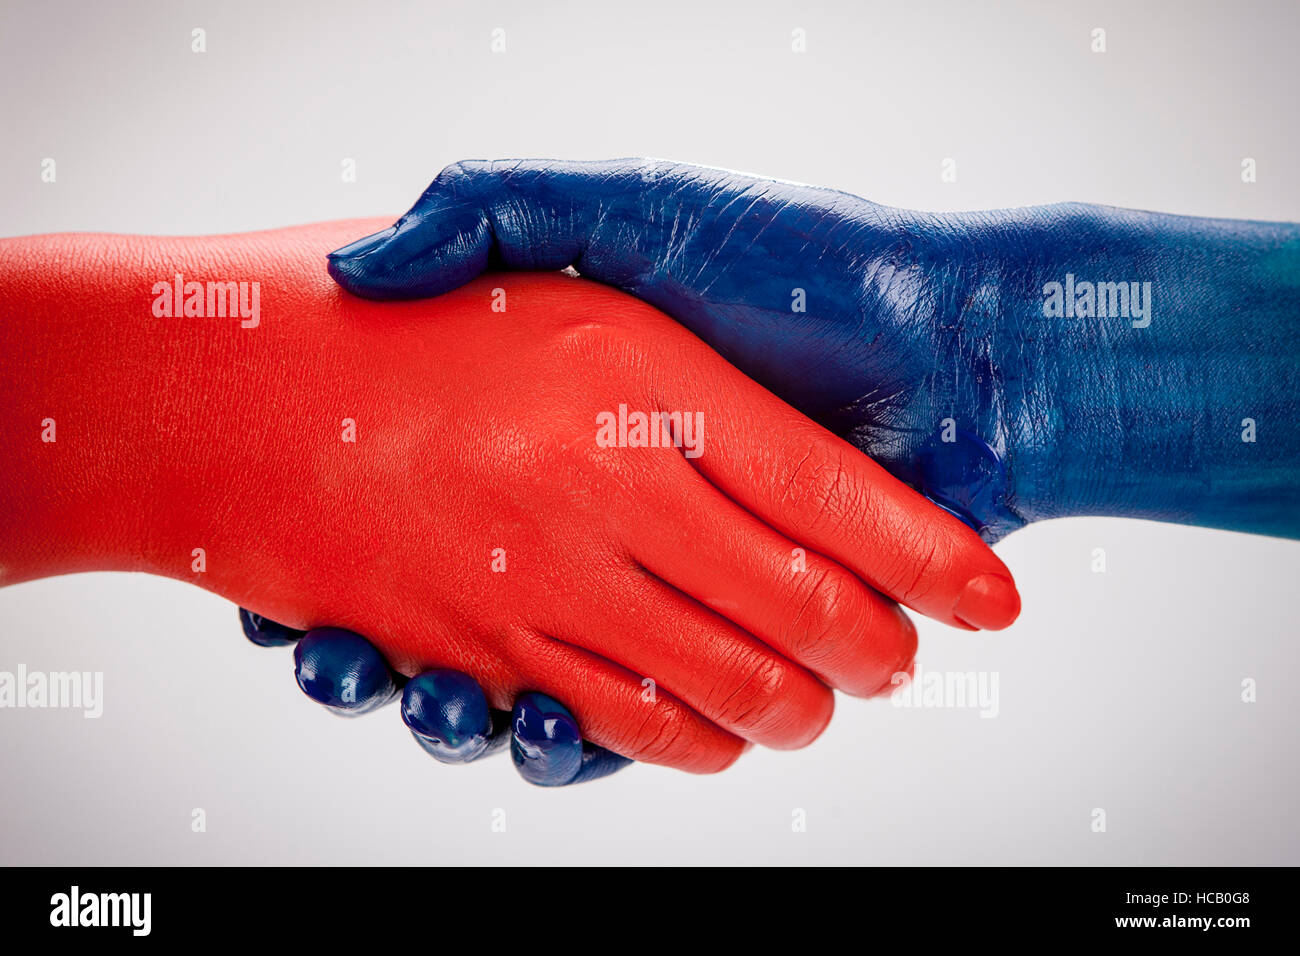 Red and blue hands shaking together Stock Photo